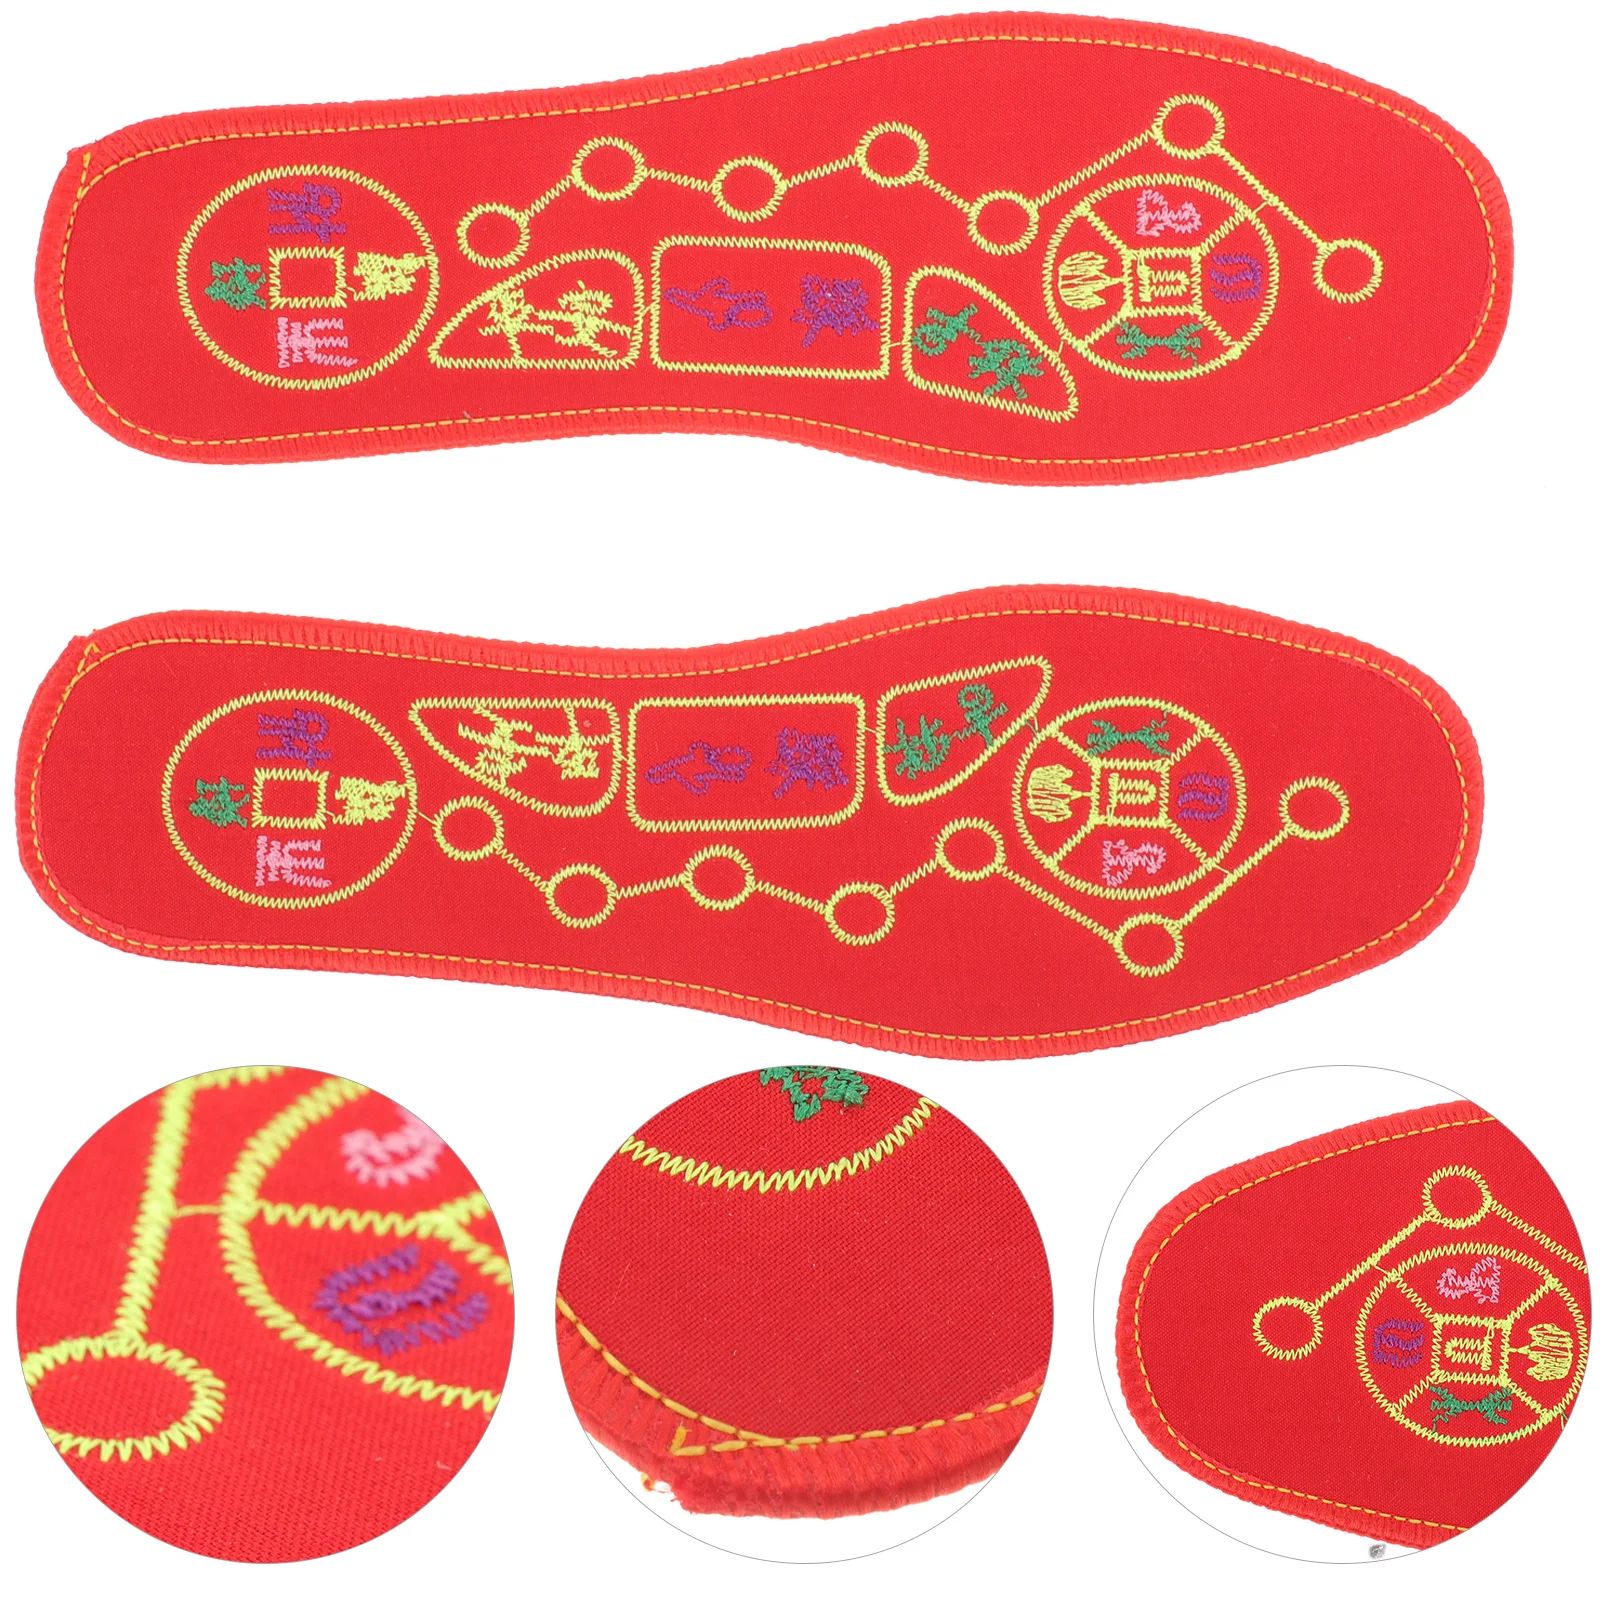 Sports Insoles 2 Pairs of Foot Pedal Seven-star Good Luck for The Year Your Inserts Replacement children orthotics insoles memory foam comfortable breathable shoes pad running sports arch support insole kids leg health care